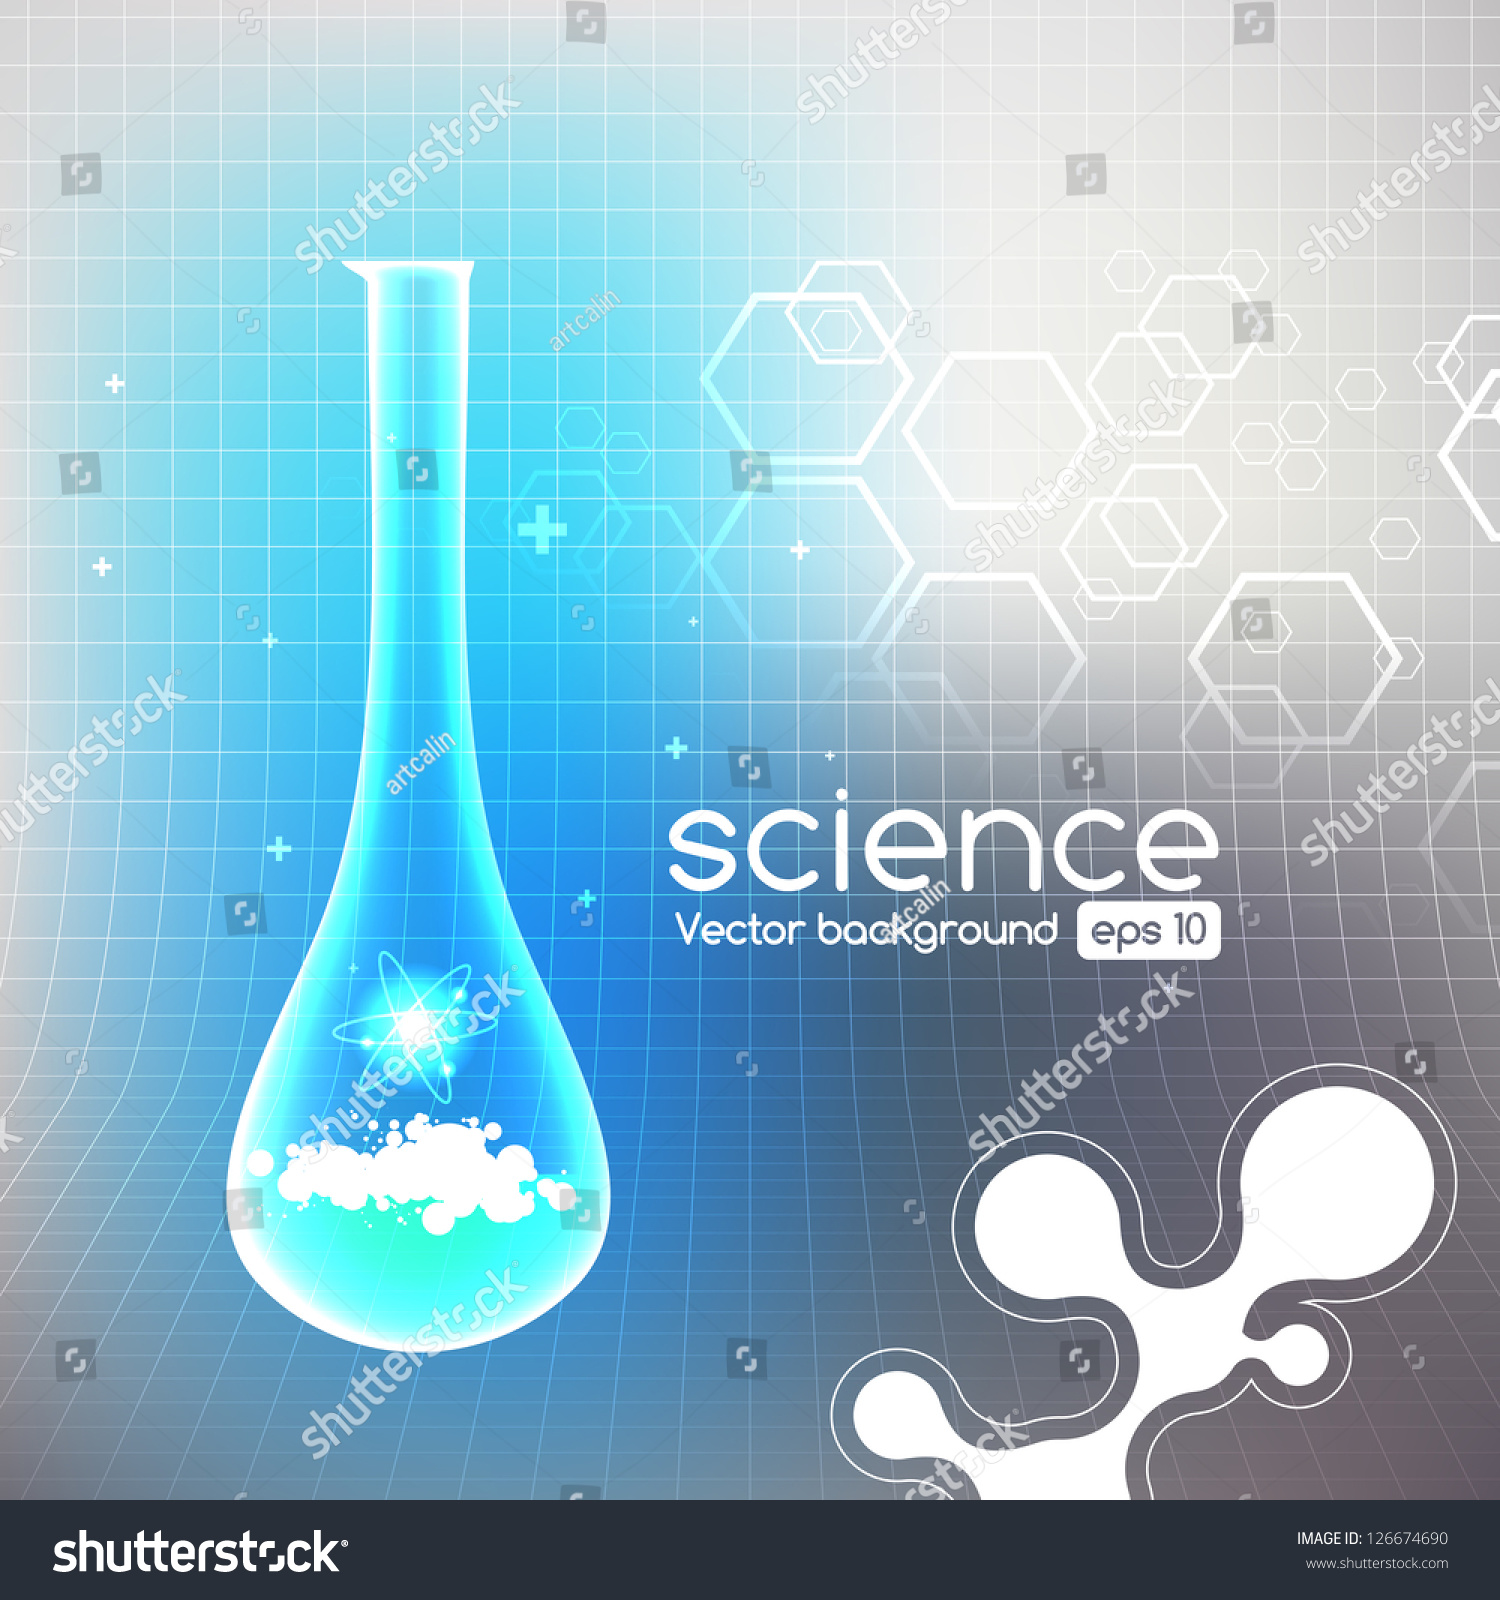 Science Background Medical Health Care Illustration Stock Vector